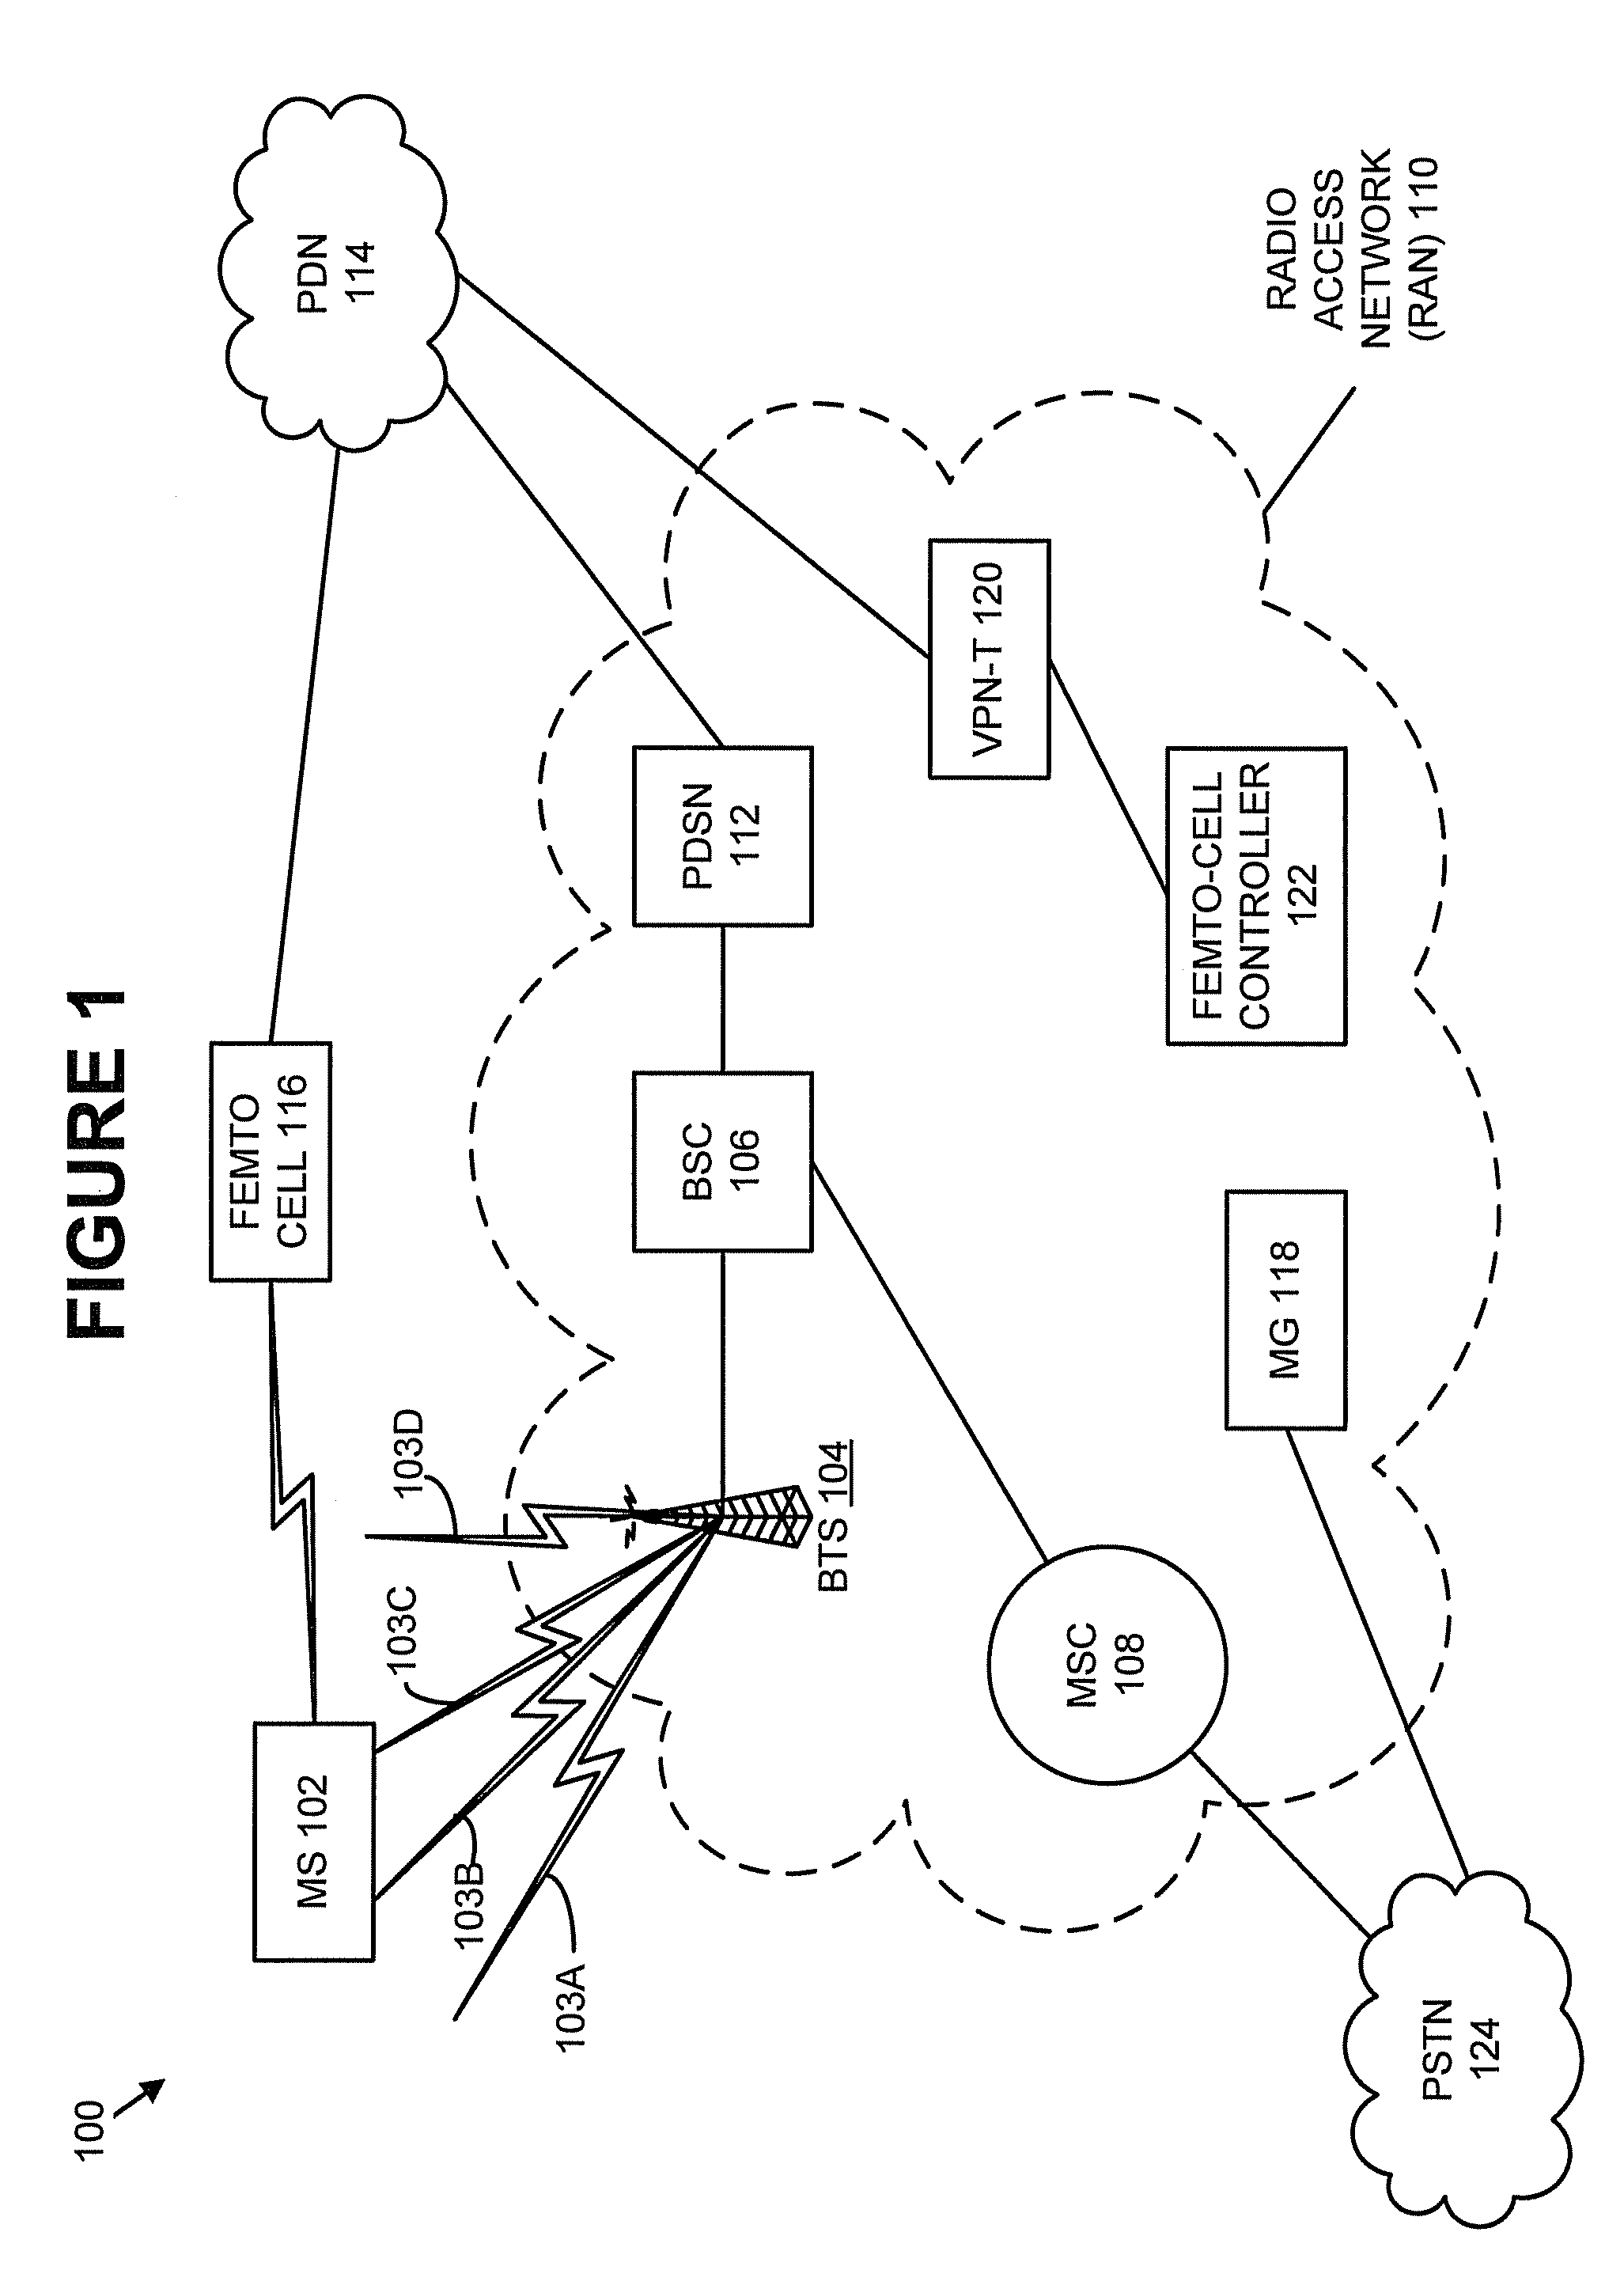 Methods and systems for temporarily modifying a macro-network neighbor list to enable a mobile station to hand off from a macro network to a femto cell